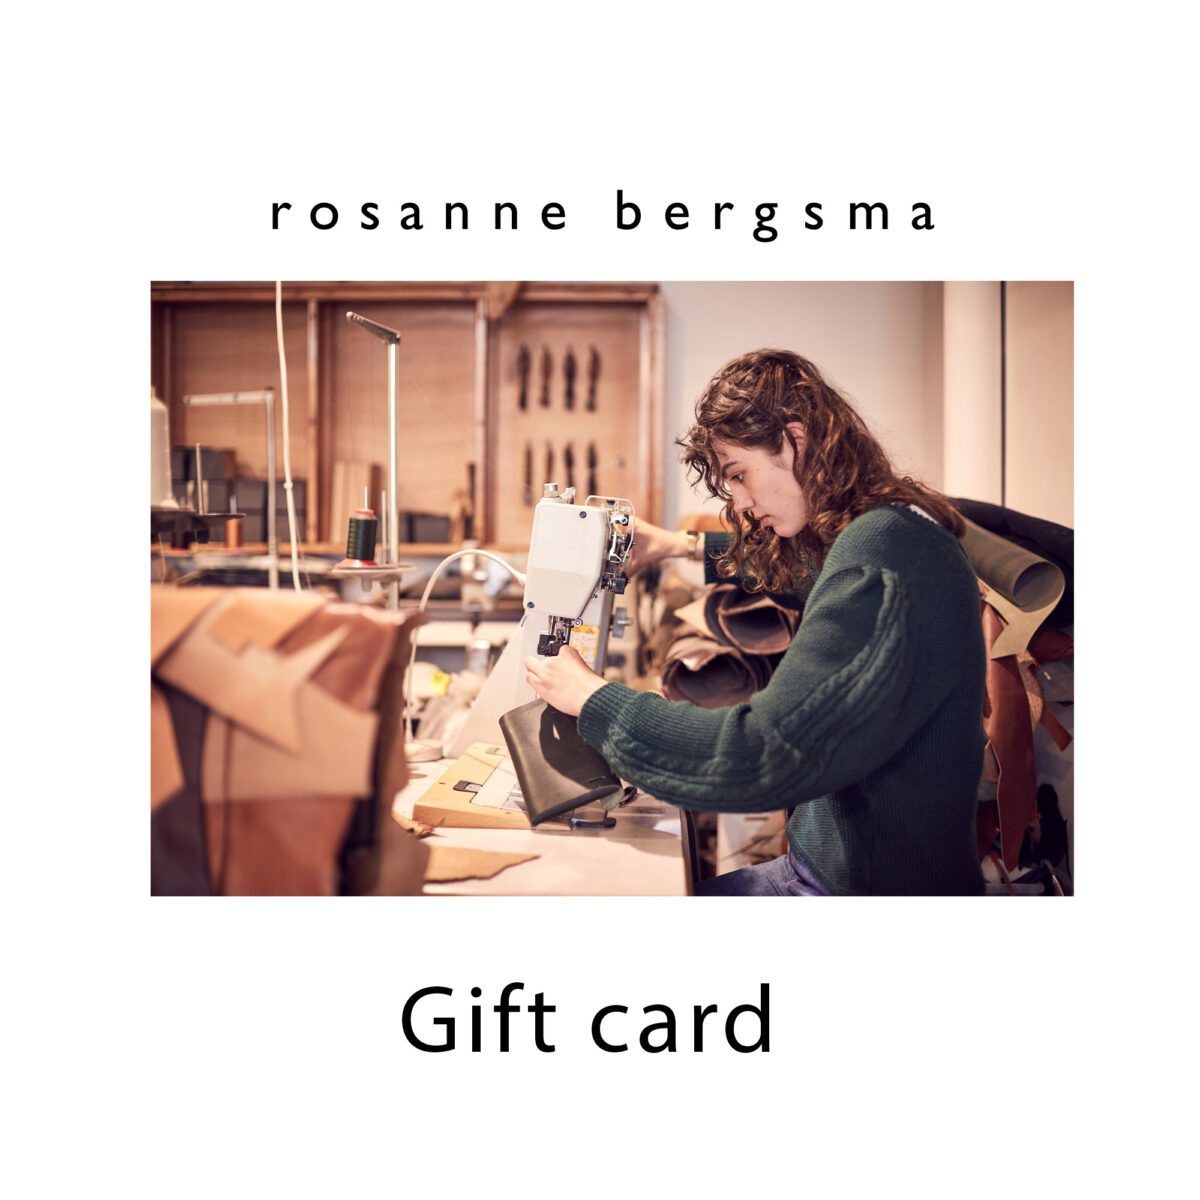 Gift card for a product or workshop